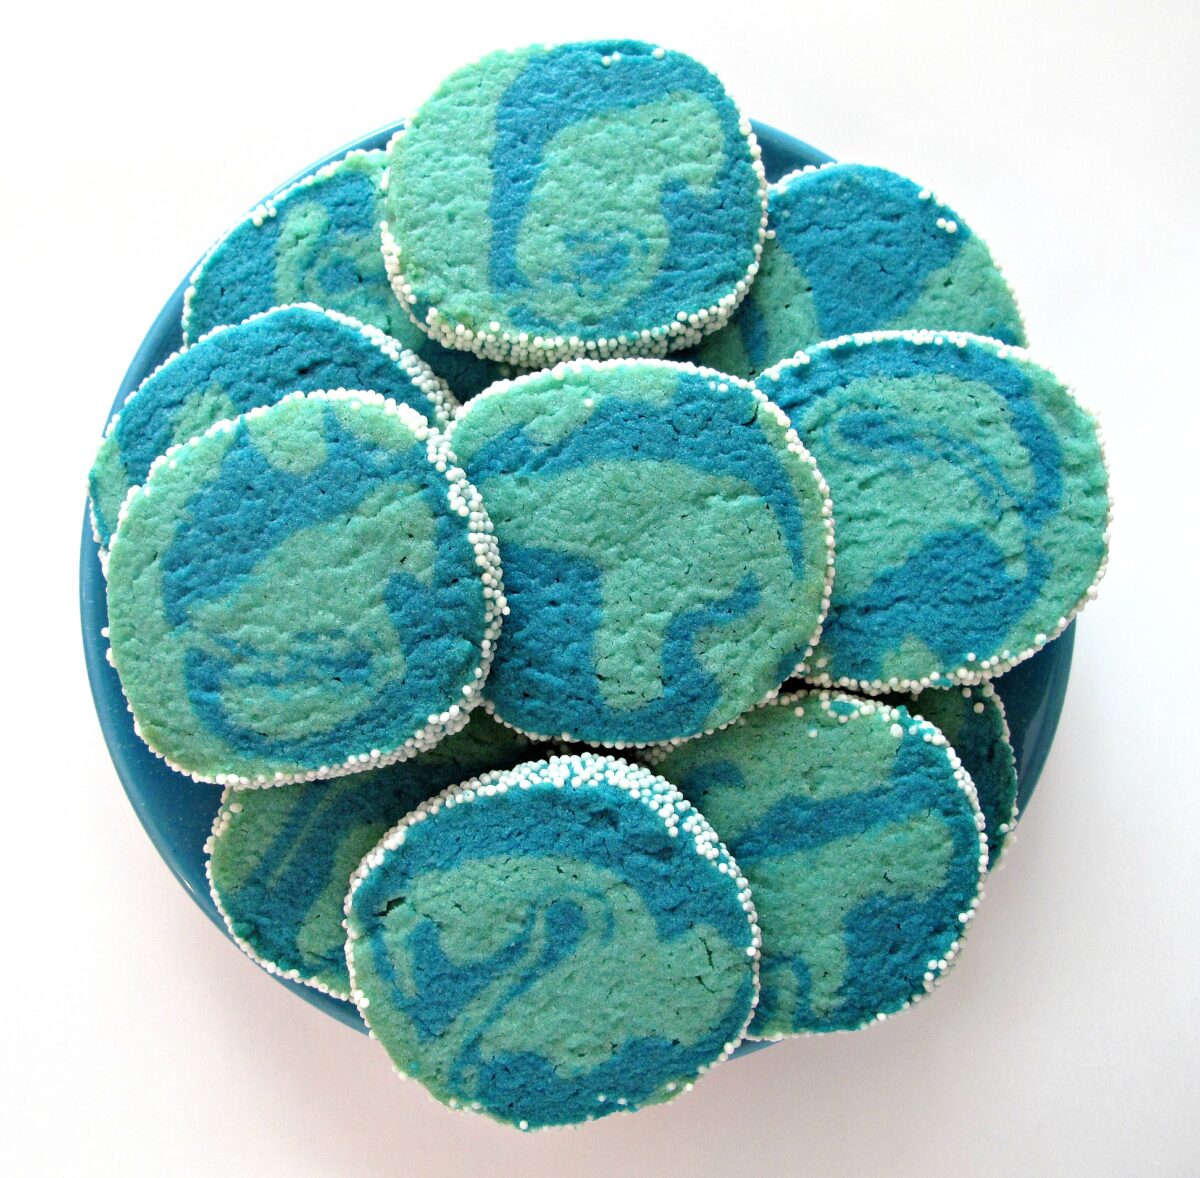 Marbled blue sugar cookies in two shades of blue with nonpareils on the edges.